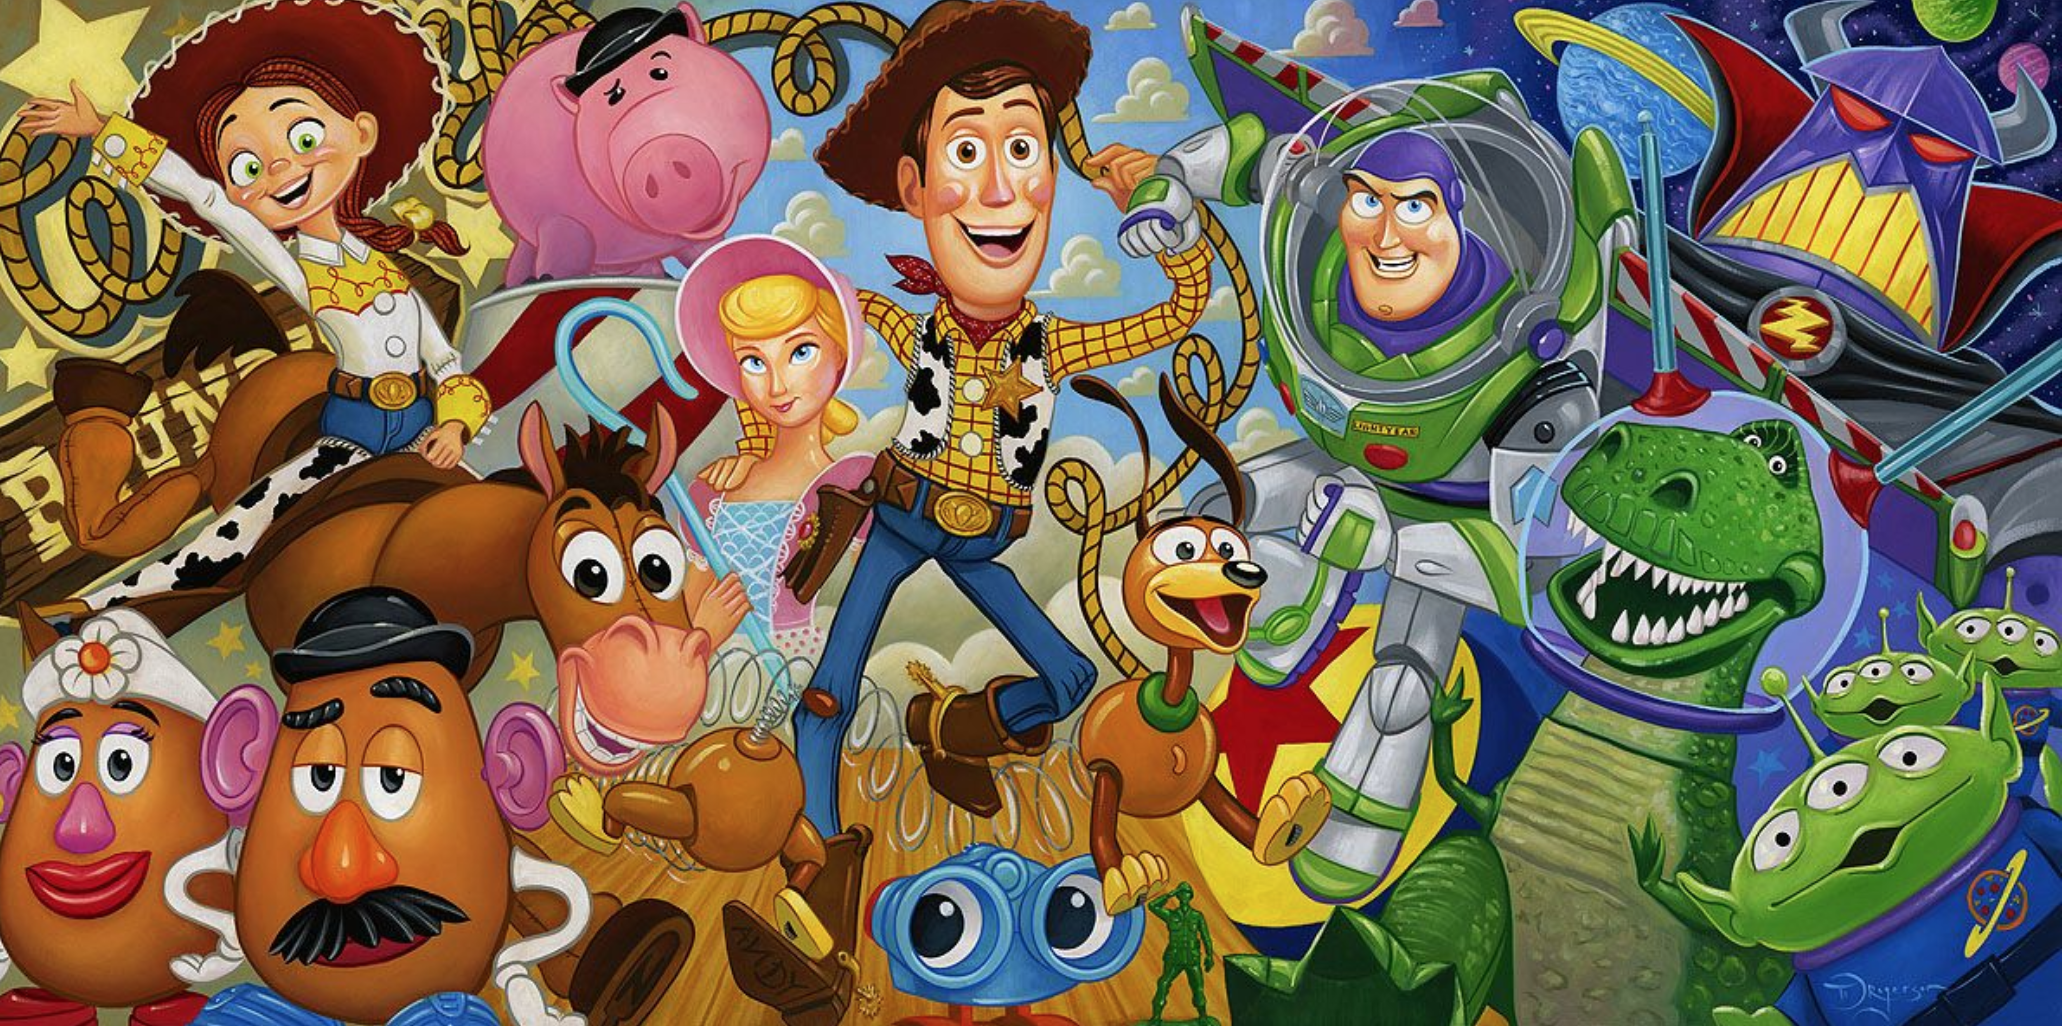 cast-of-toys-toy-story-embellished-gicl-e-on-canvas-by-tim-rogerson